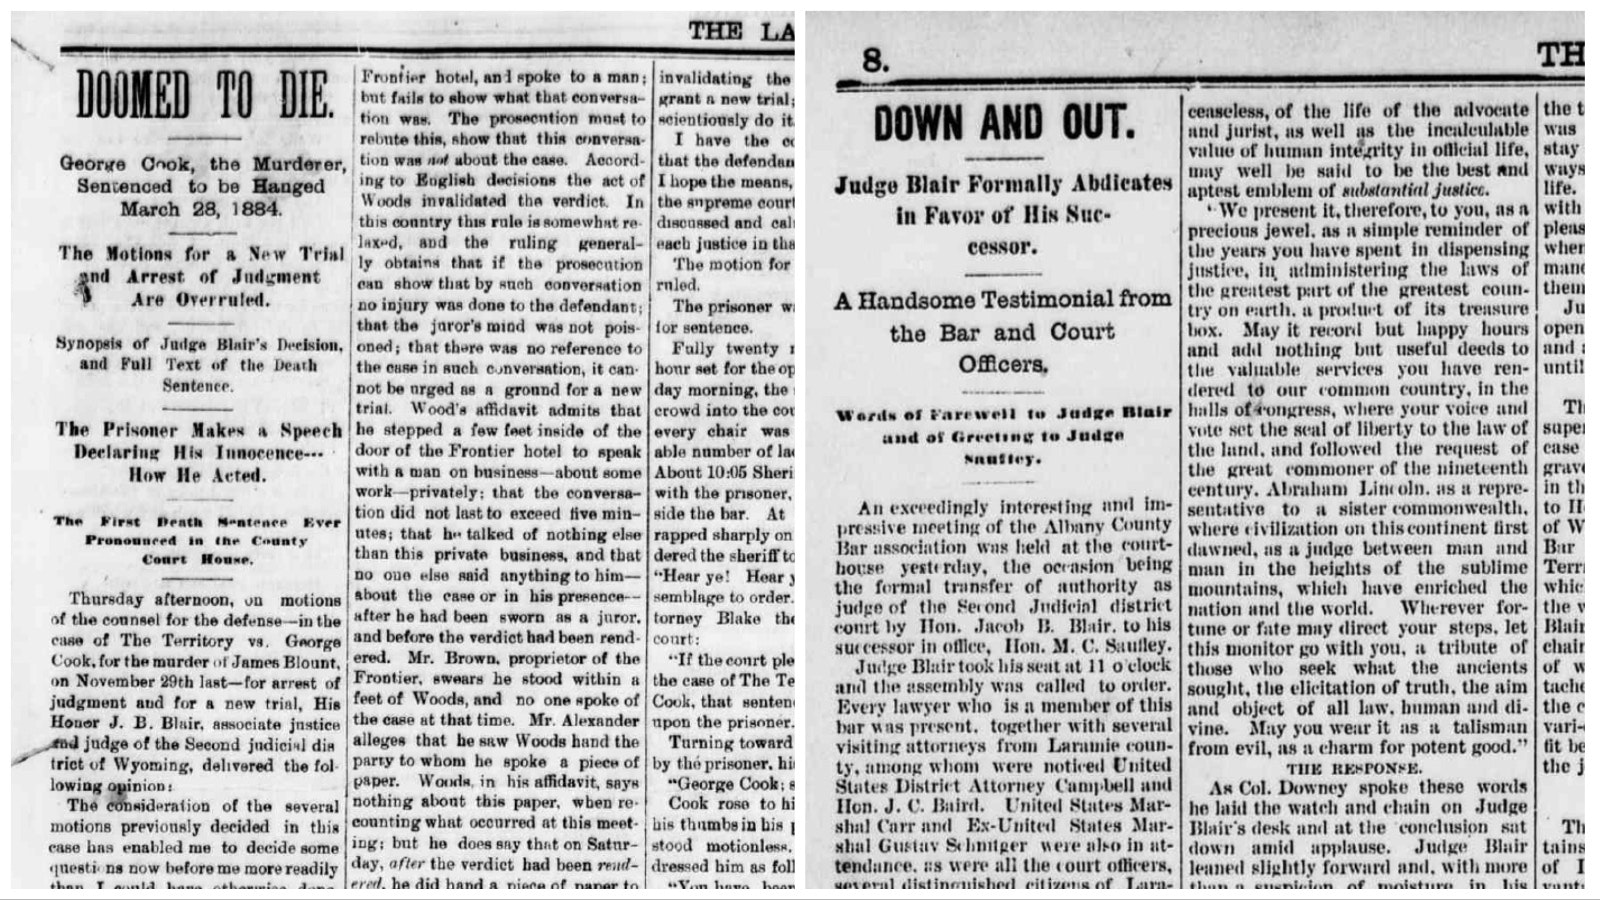 Newspaper clippings from Wyoming newspapers writing about Judge Jacob Blair during Wyoming's territorial days.